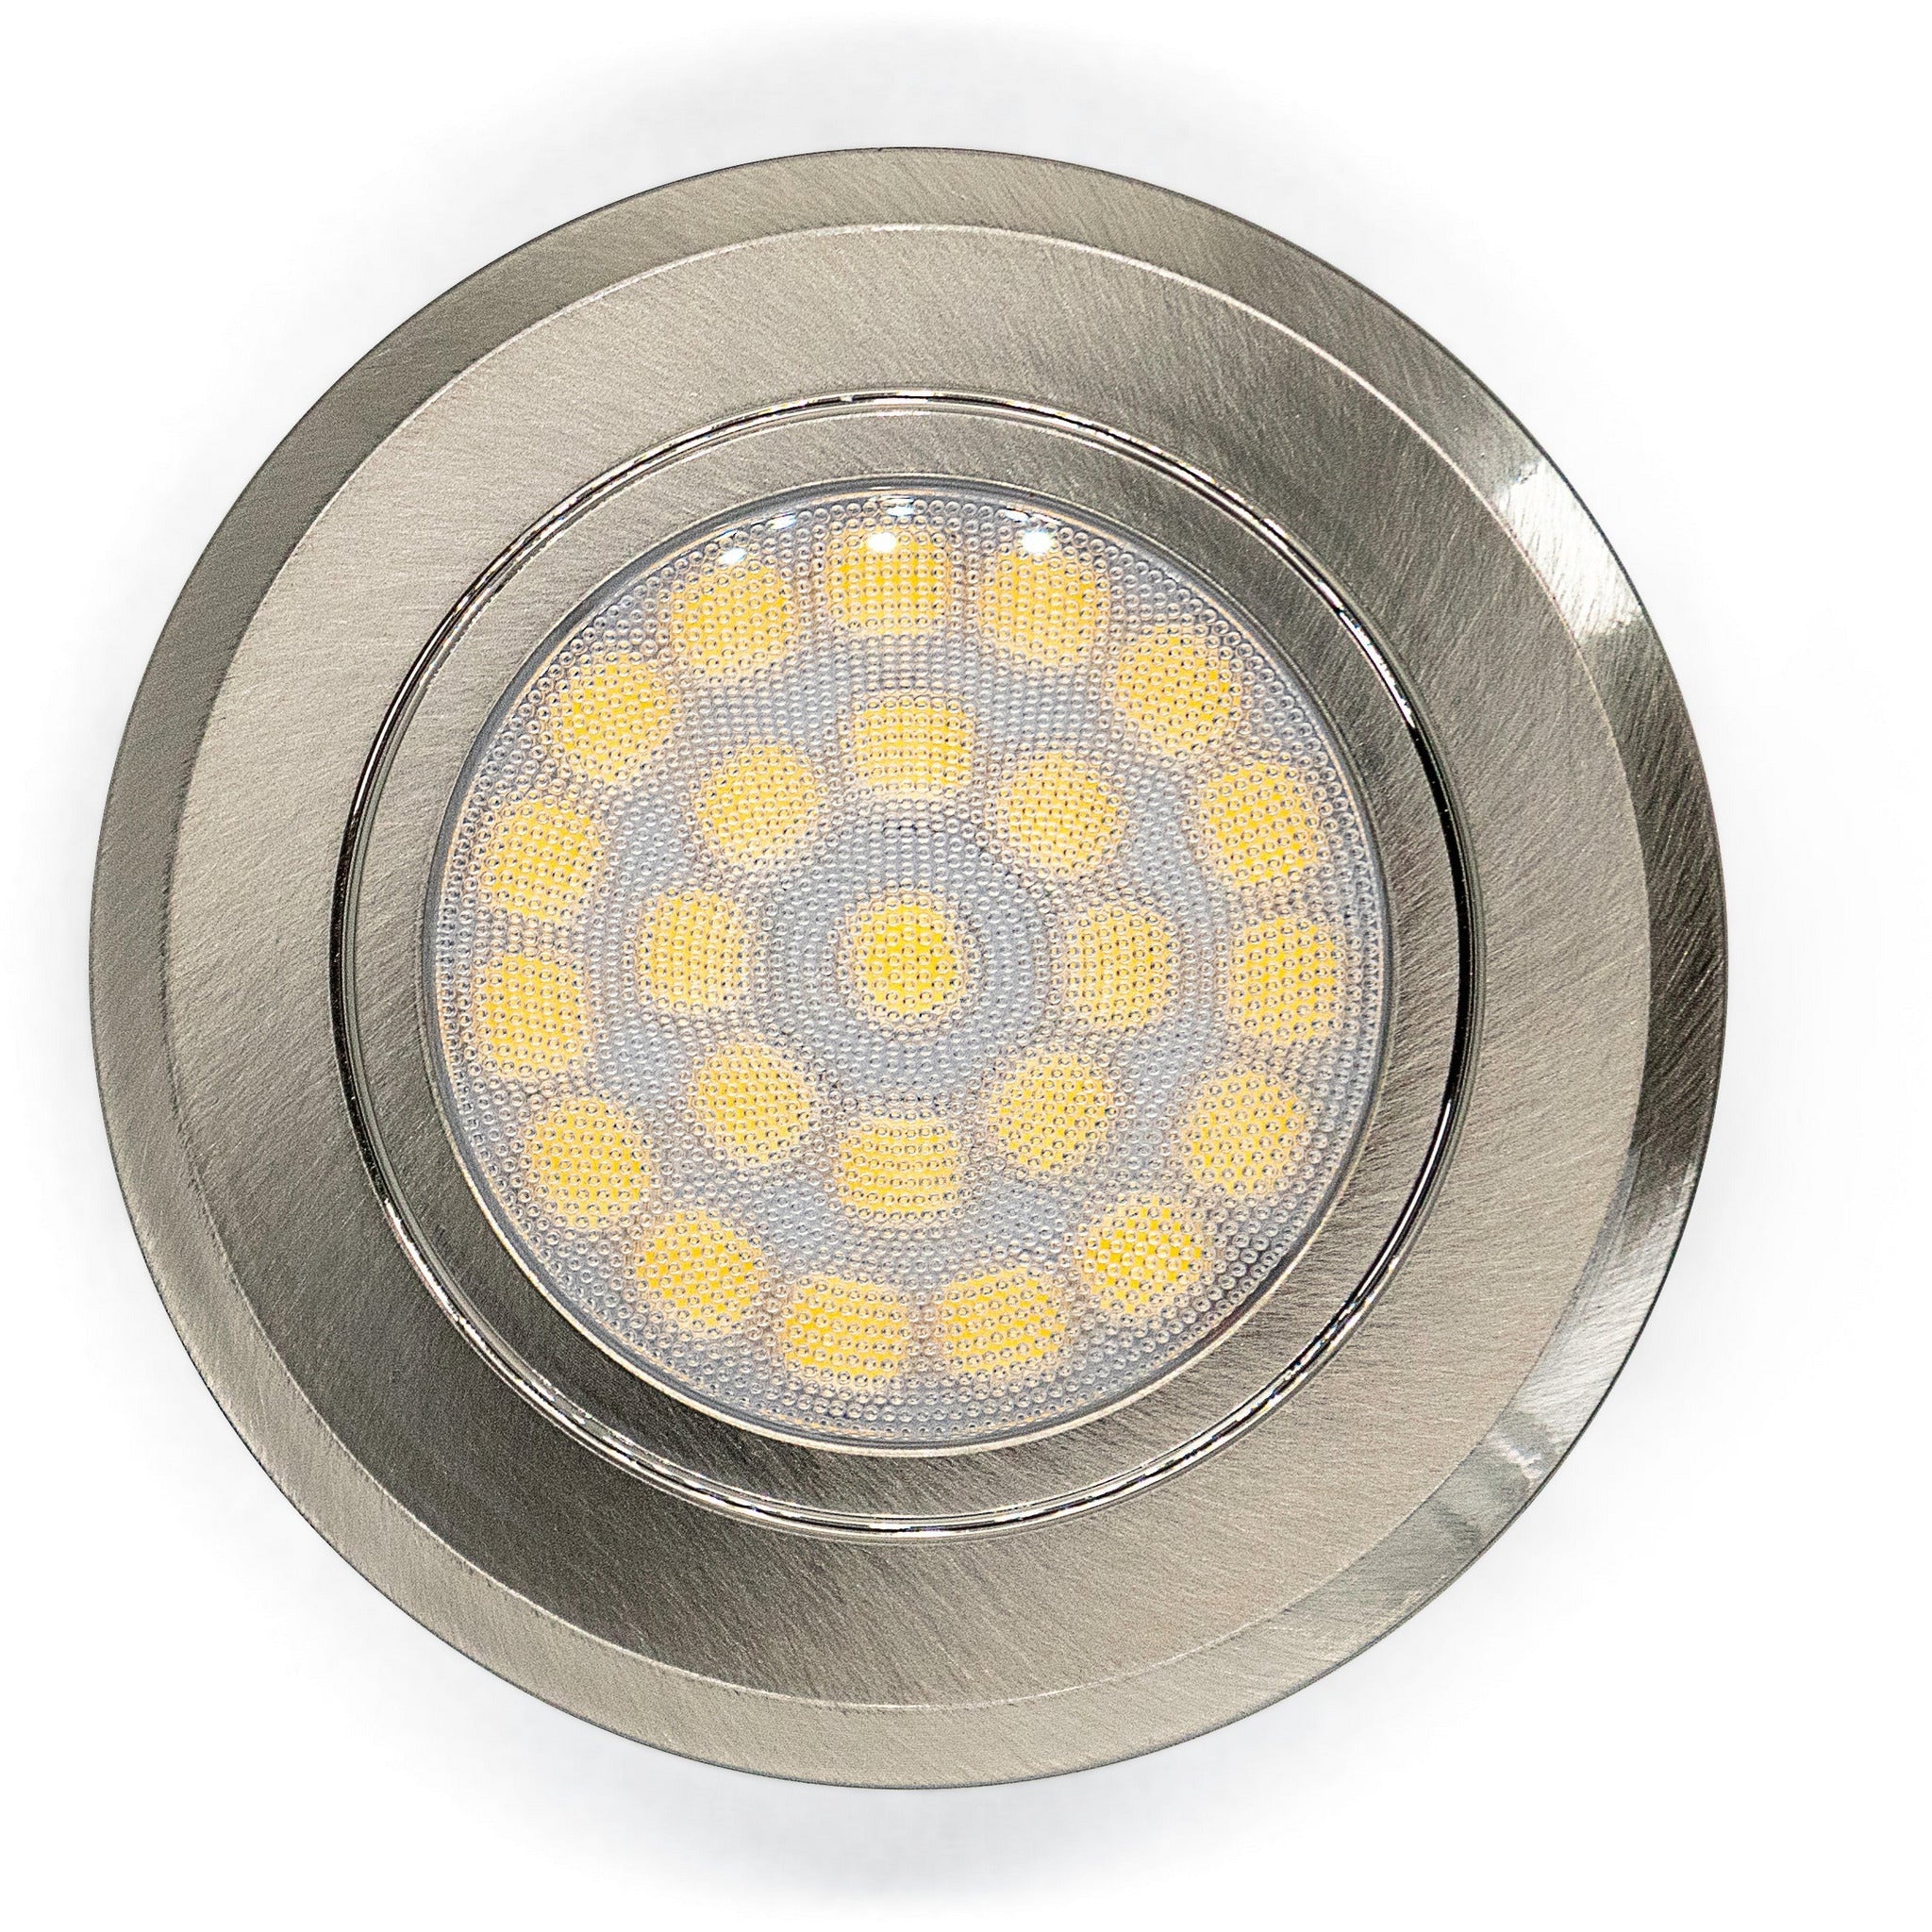 Brushed Nickel 3W 24 LED Recessed Light - Dimmable, Touch On/Off (Warm White) Kiravans 